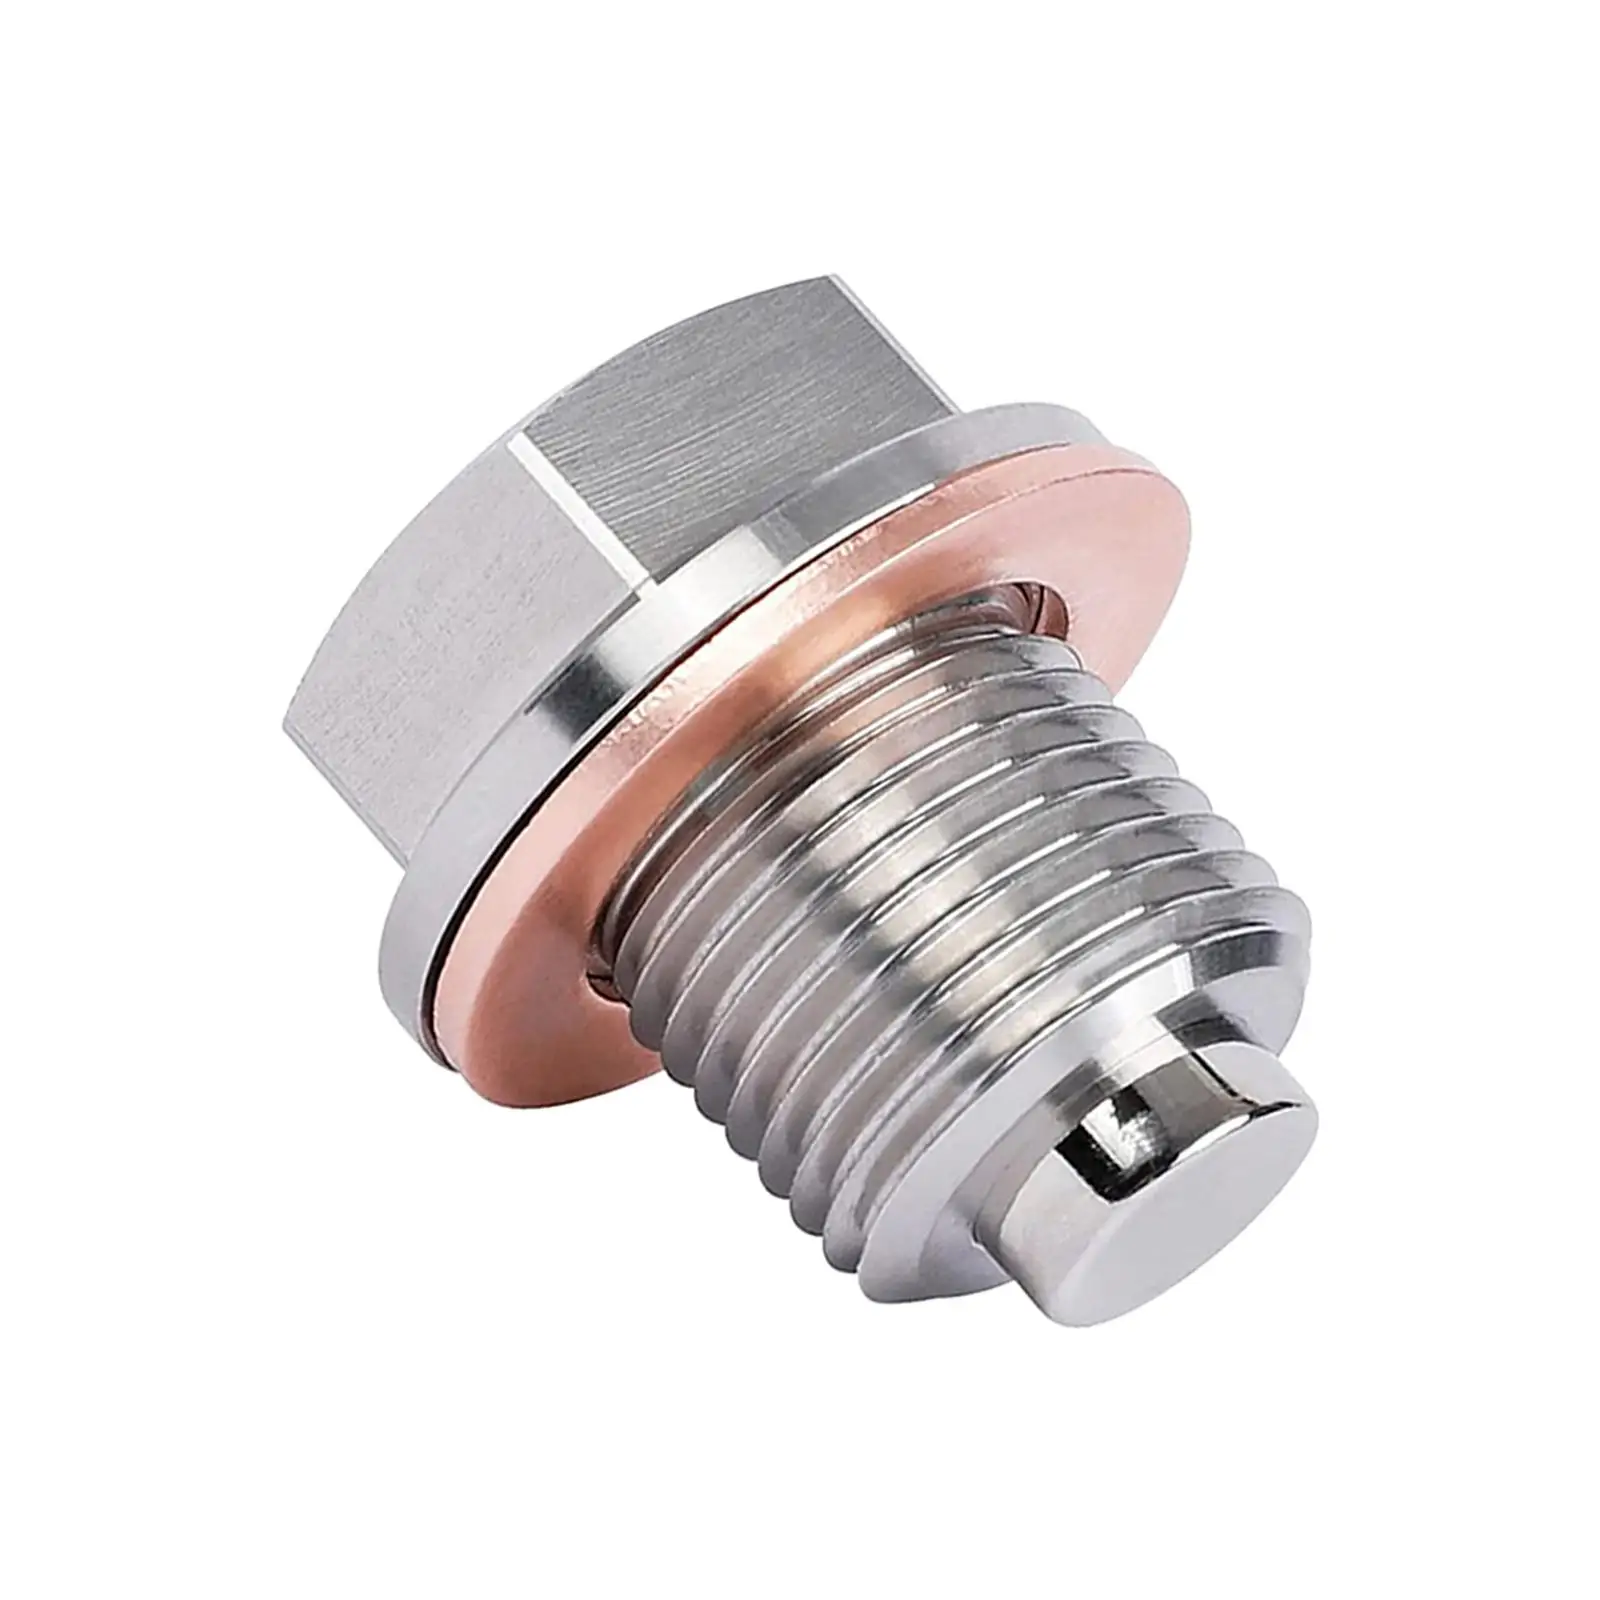 Oil Drain Plug M16x1.5 Easy to Install Replace Reusable Engine Oil Pan Protection Plug Neodymium Magnet Bolt for Motorcycle